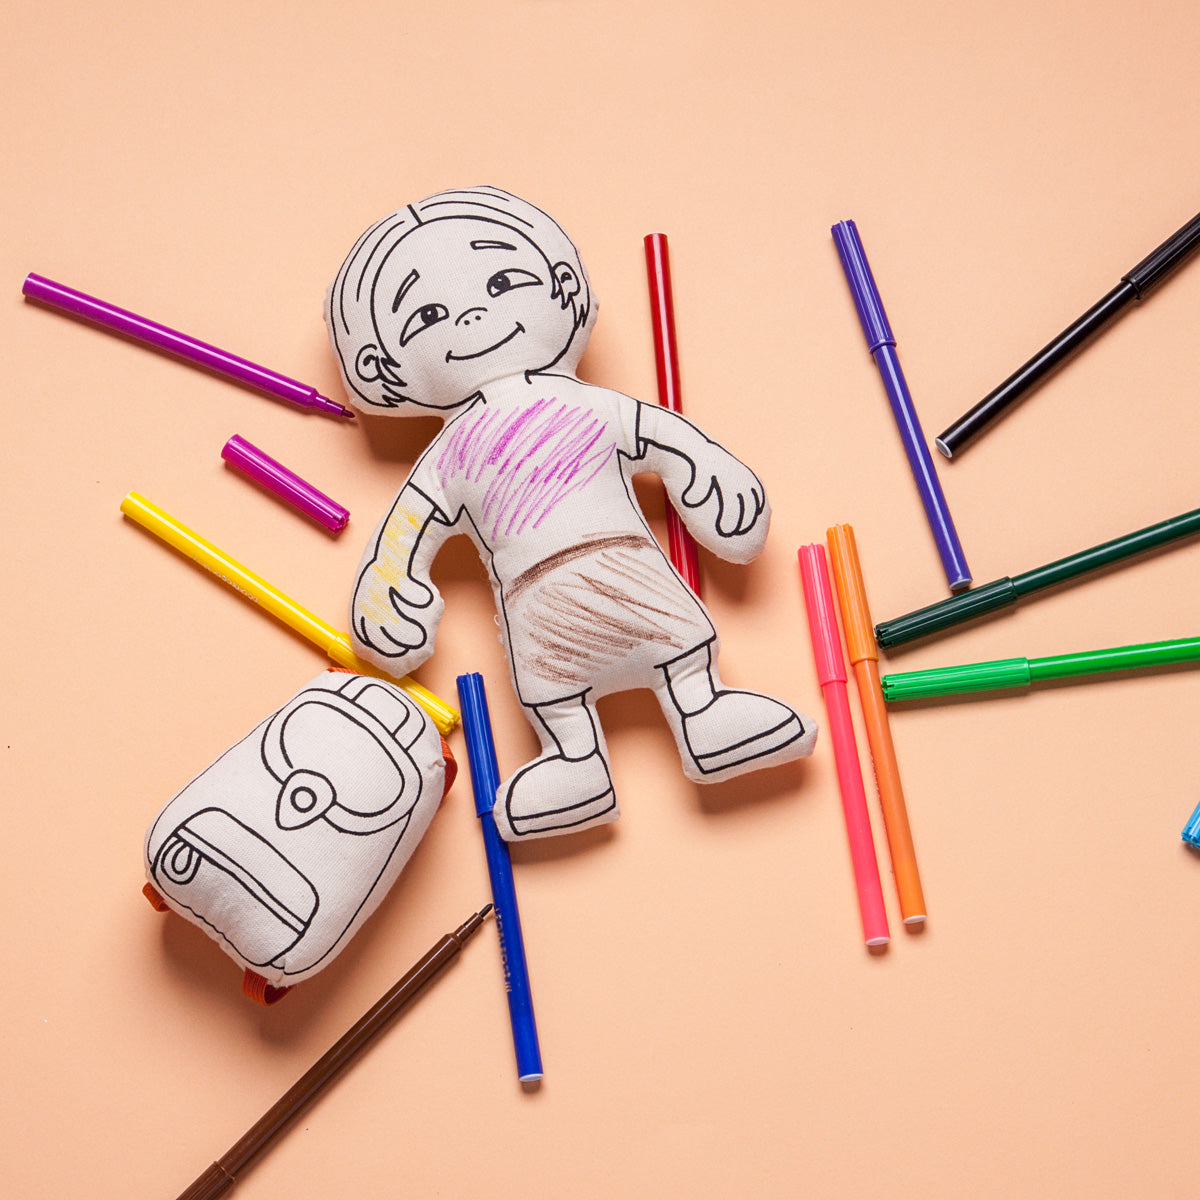 Kiboo Kids: Doll For Coloring - Gender Neutral - Kid With Parted Hair